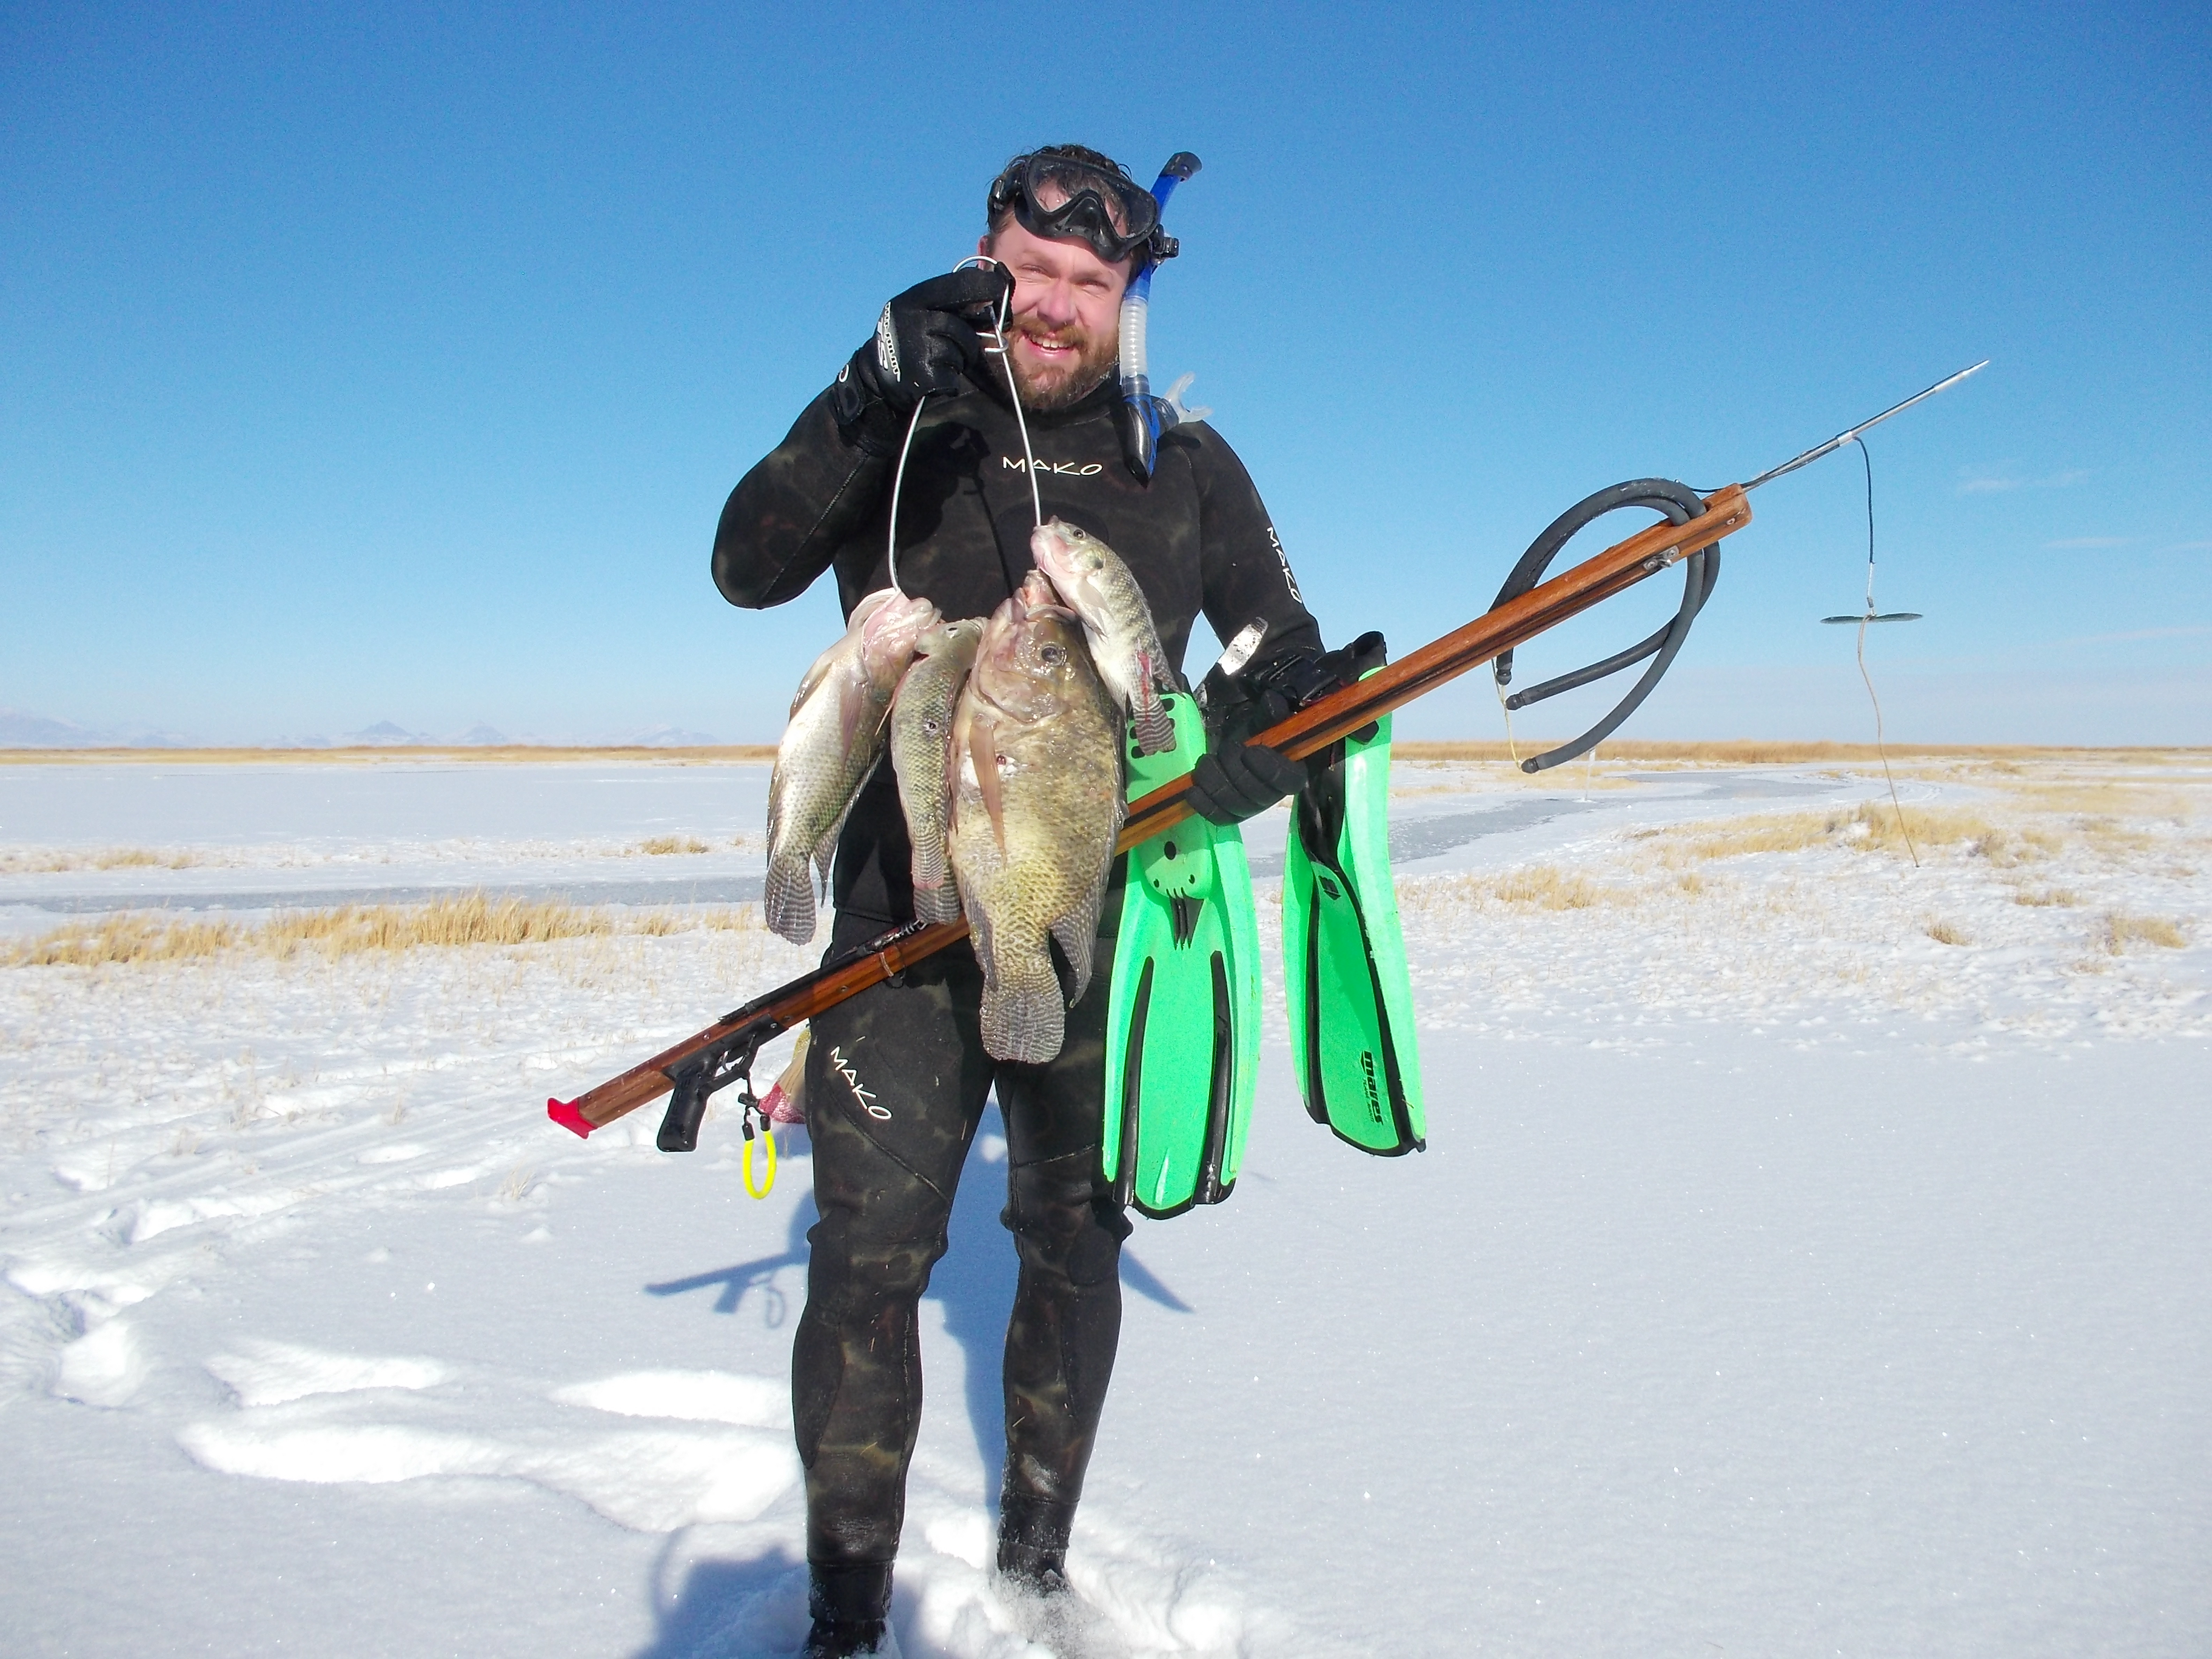 Jared Zierenberg spearfishing in the snow